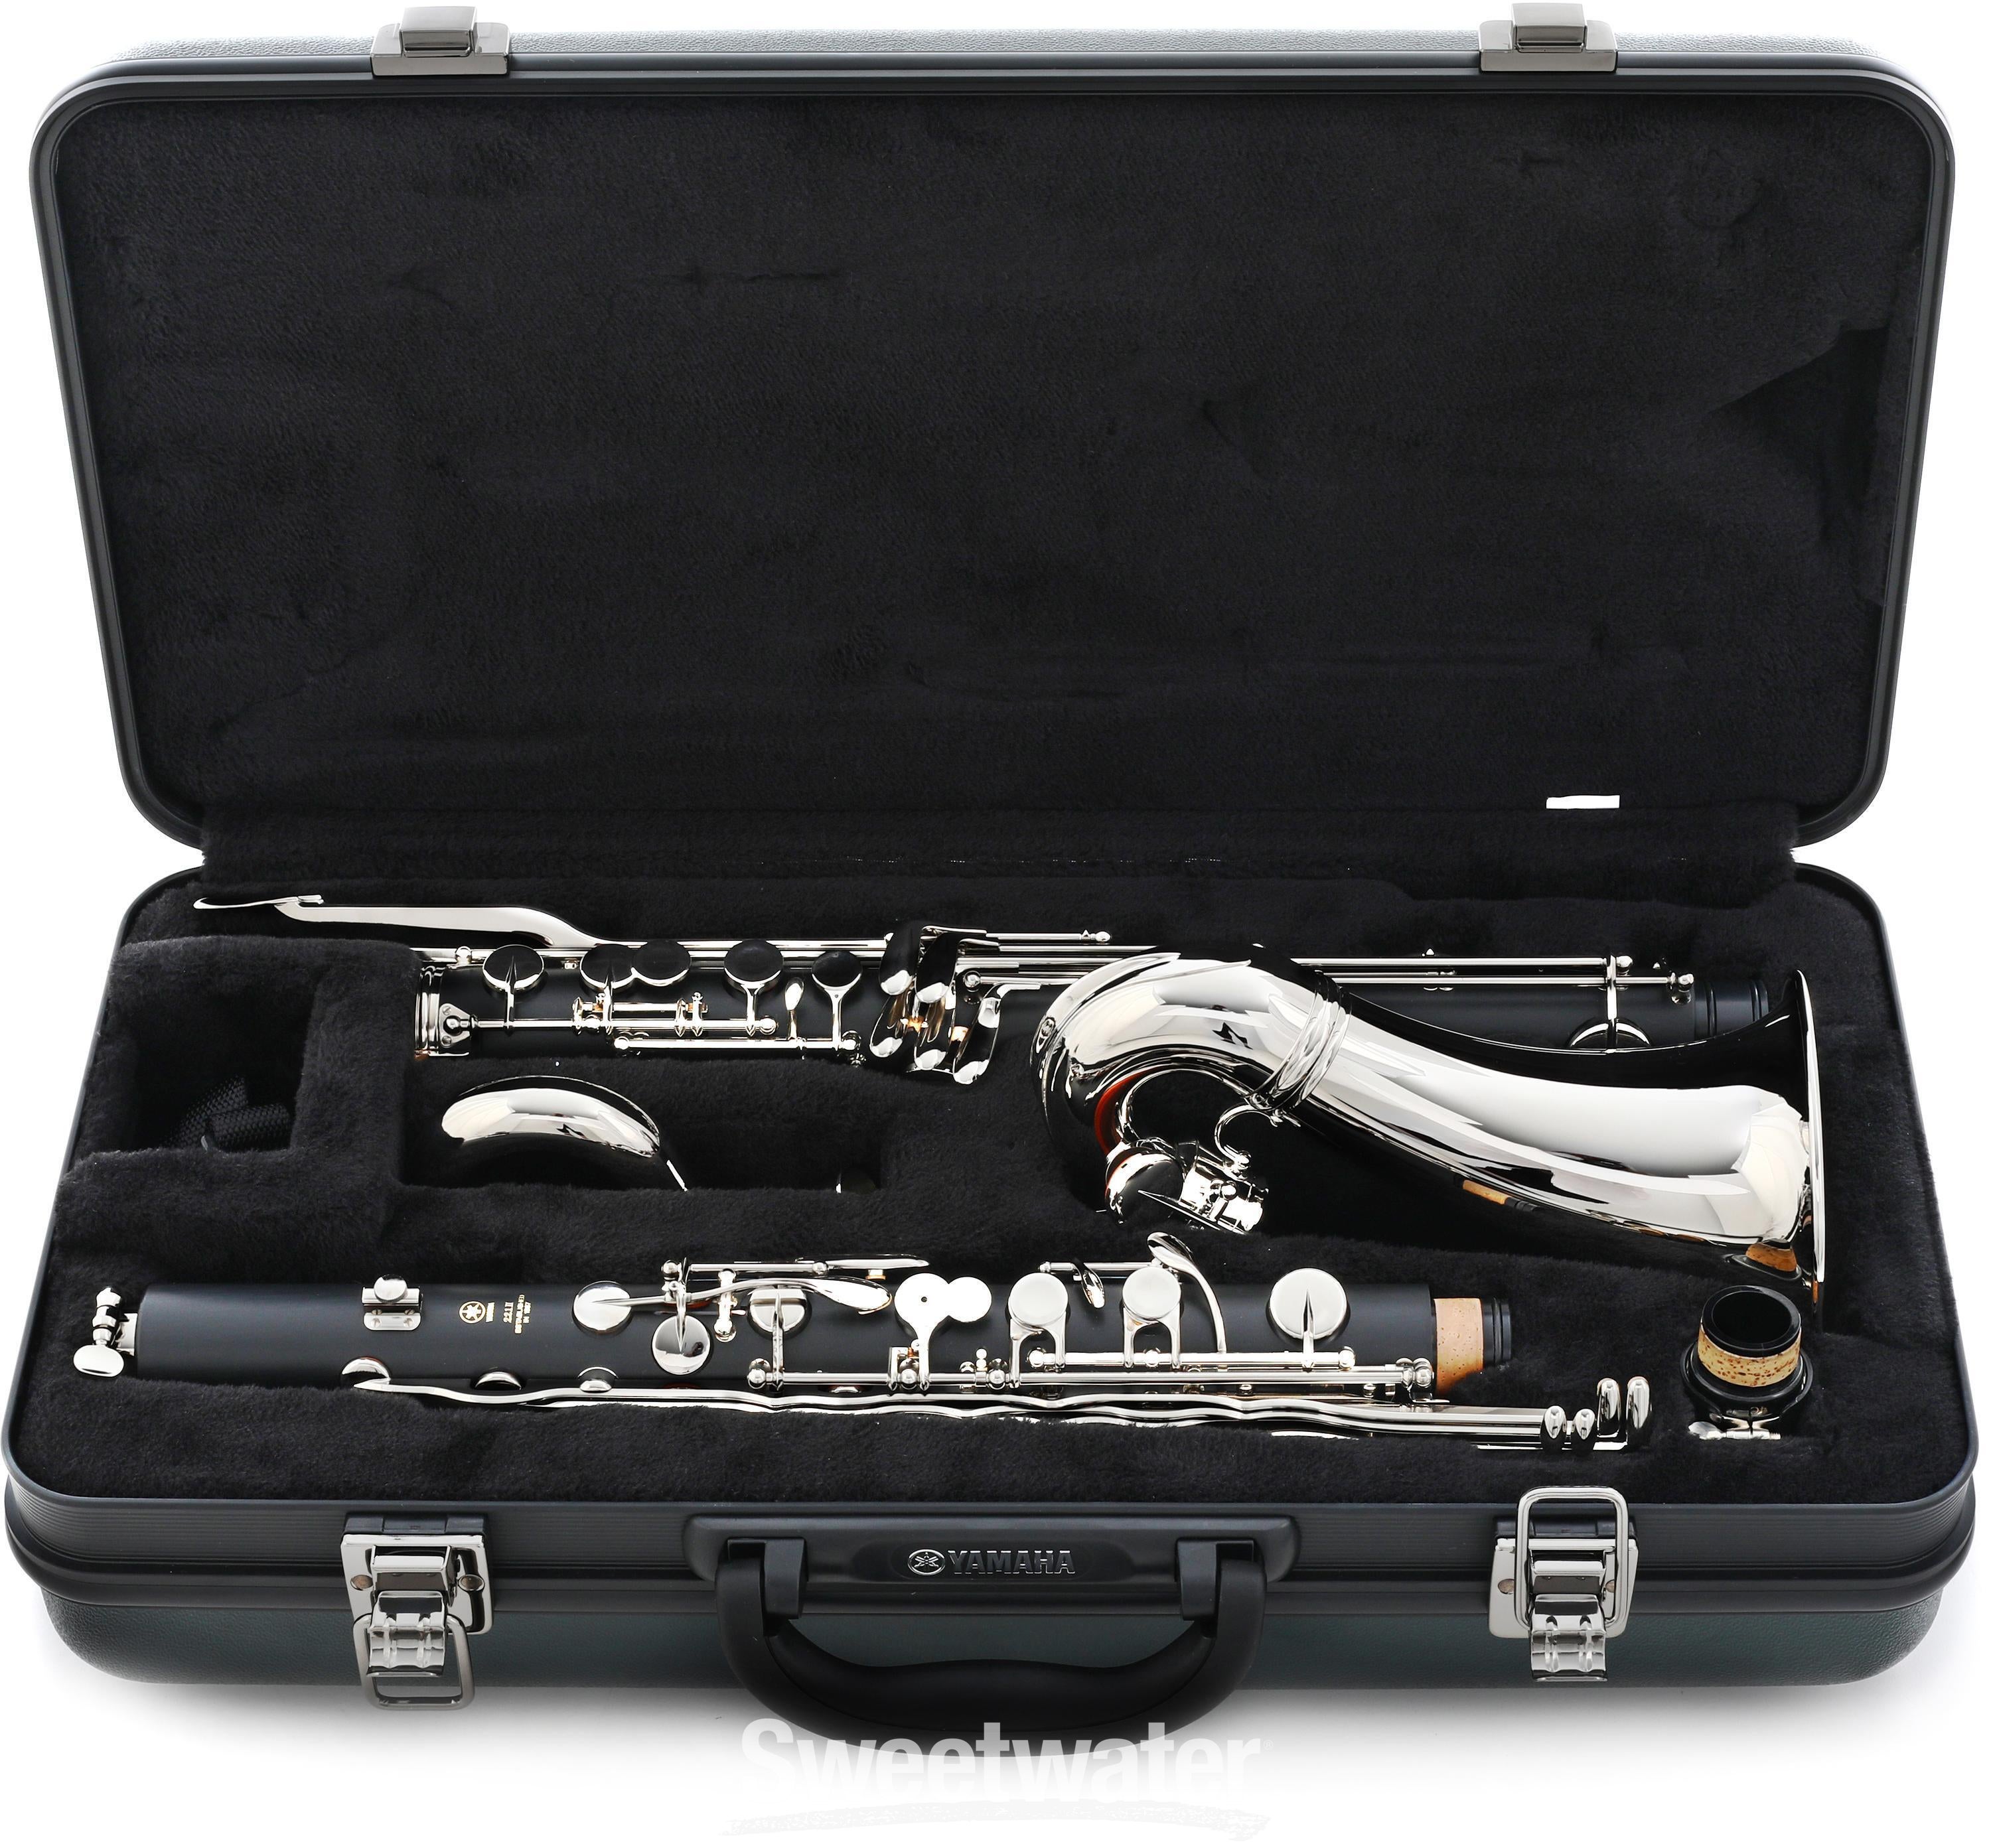 Yamaha YCL-221II Student Bass Clarinet with Nickel Keys | Sweetwater